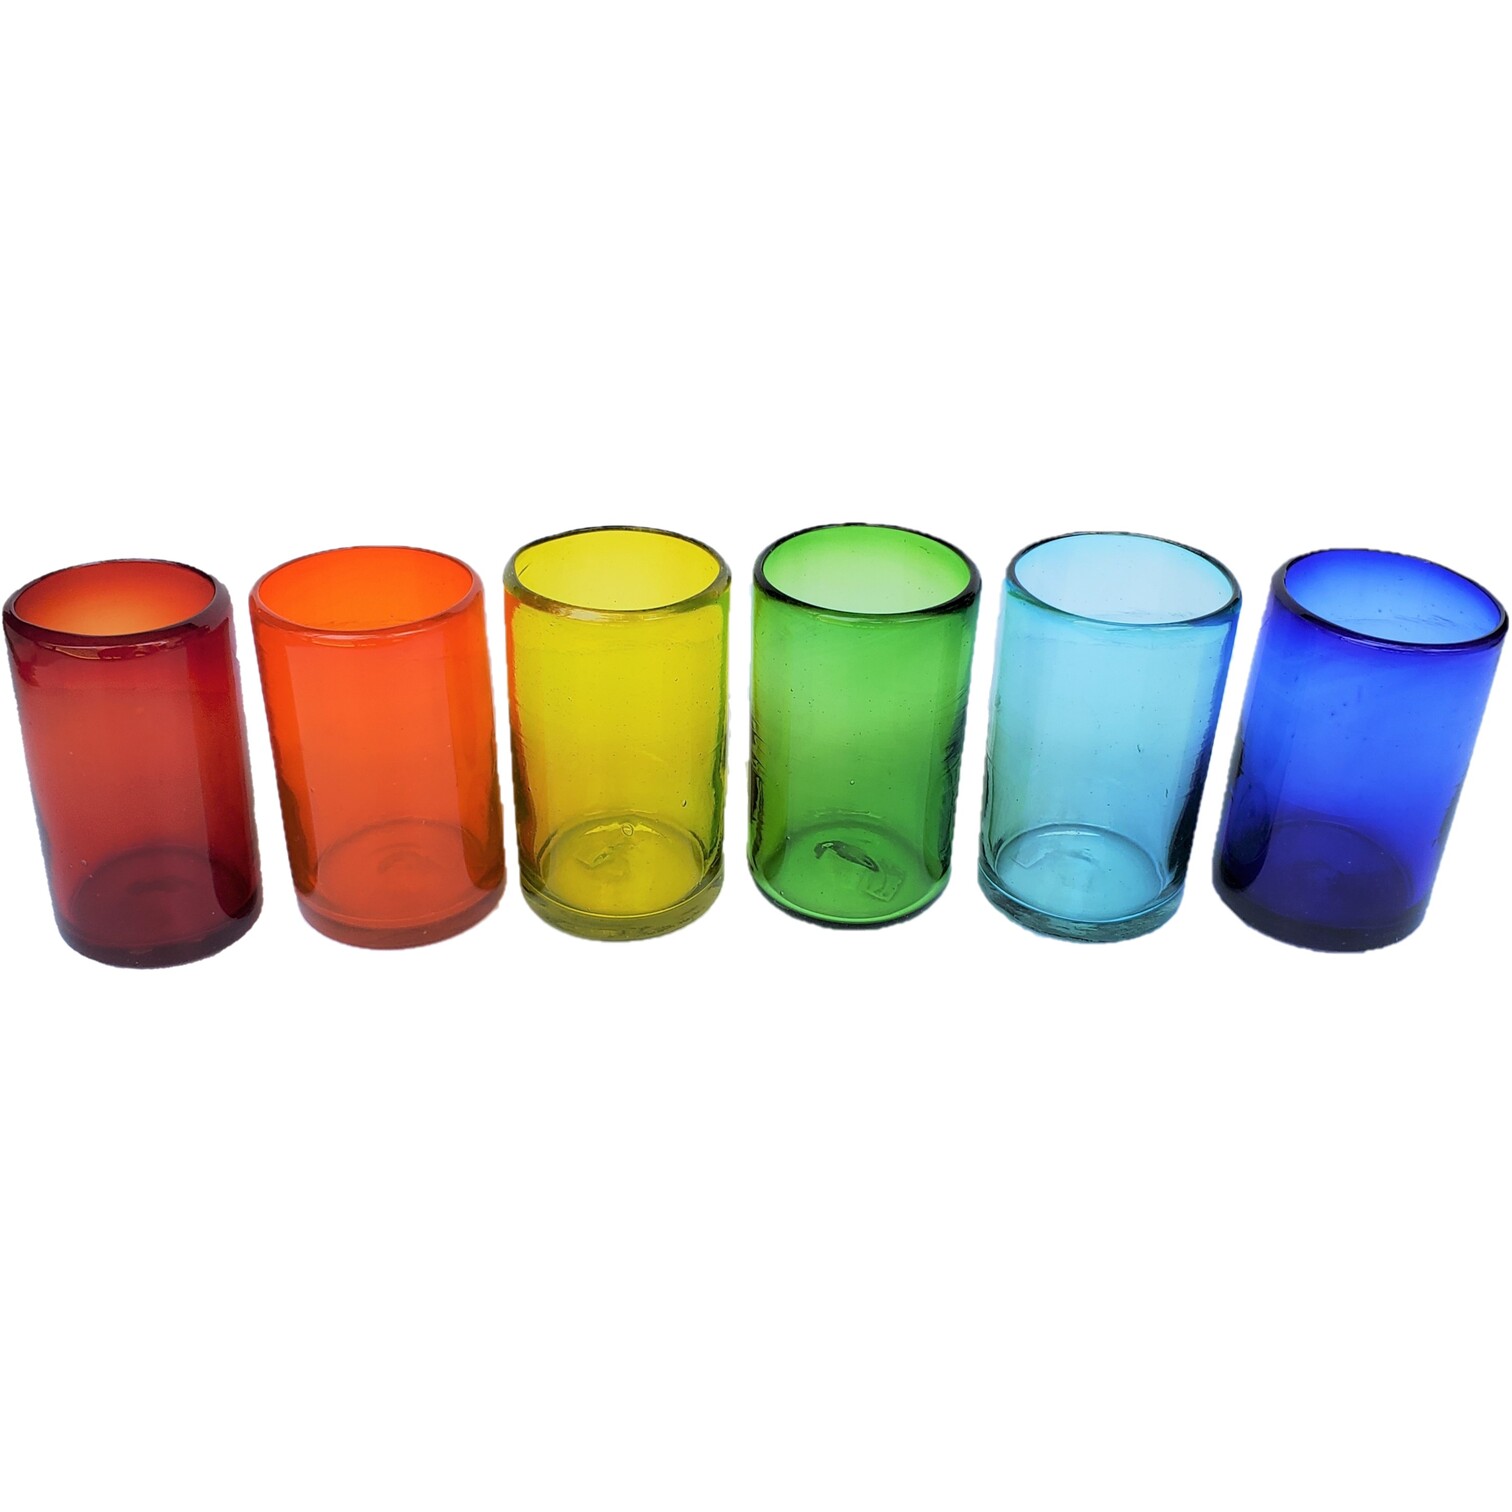 MEXICAN GLASSWARE / Rainbow Colored 14 oz Drinking Glasses 